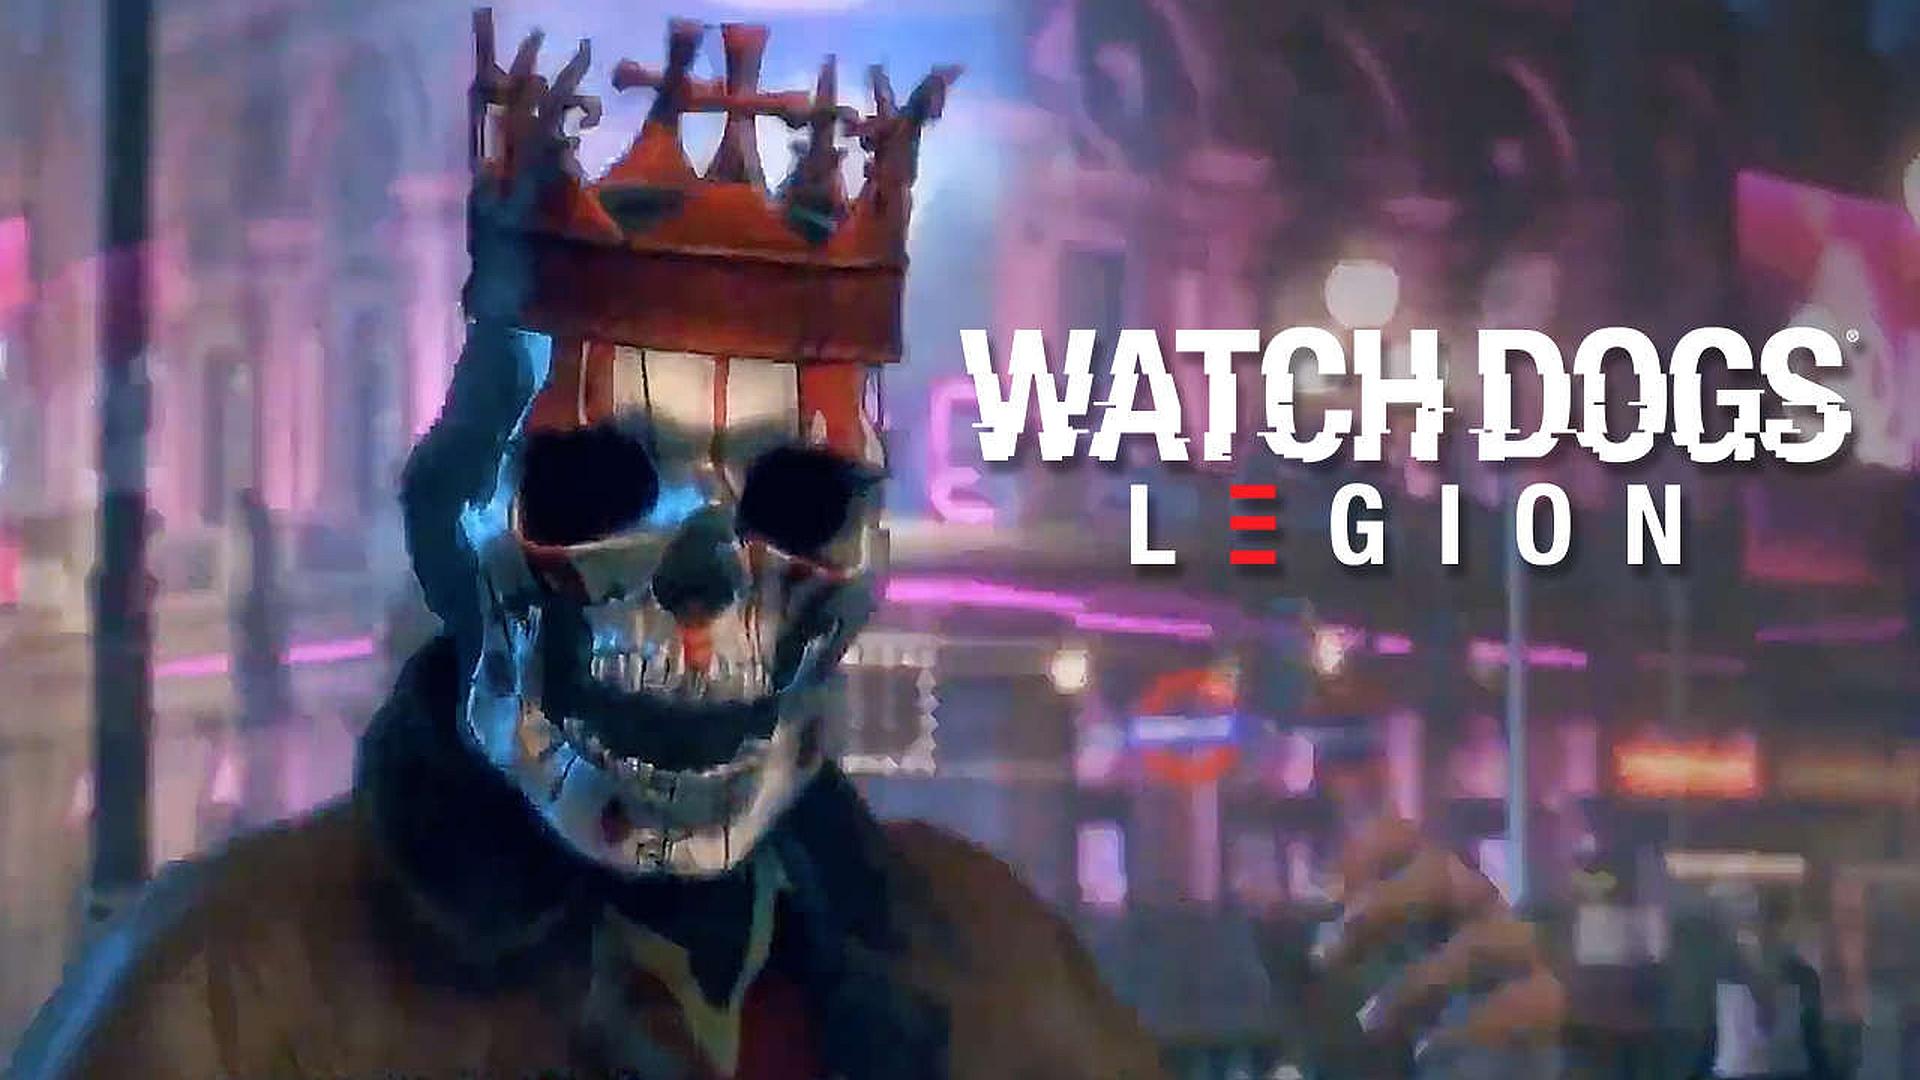 Watch Dogs Legion Online Mode Delayed Indefinitely on PC Due to Crashes